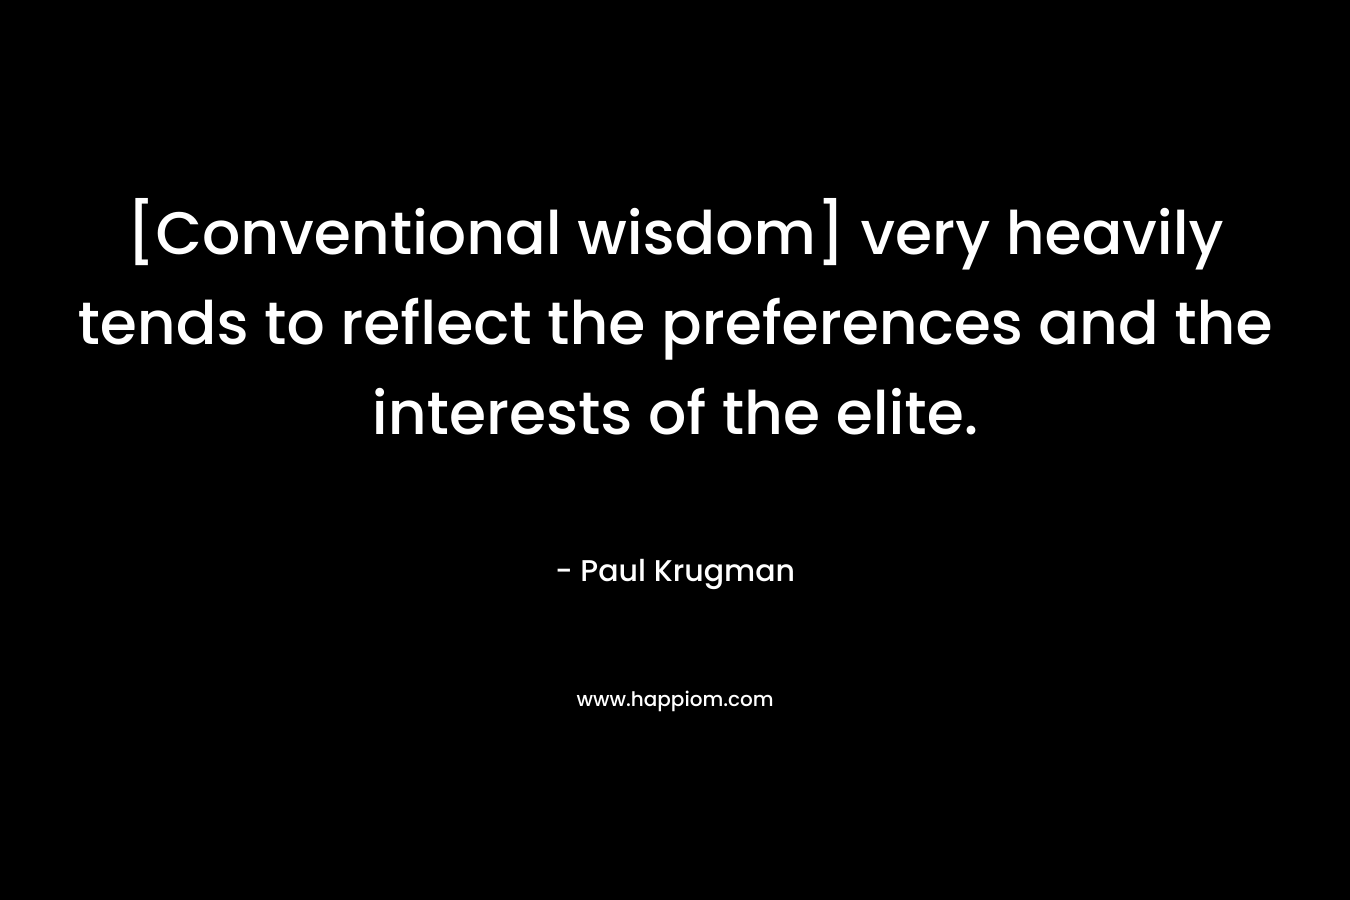 [Conventional wisdom] very heavily tends to reflect the preferences and the interests of the elite. – Paul Krugman